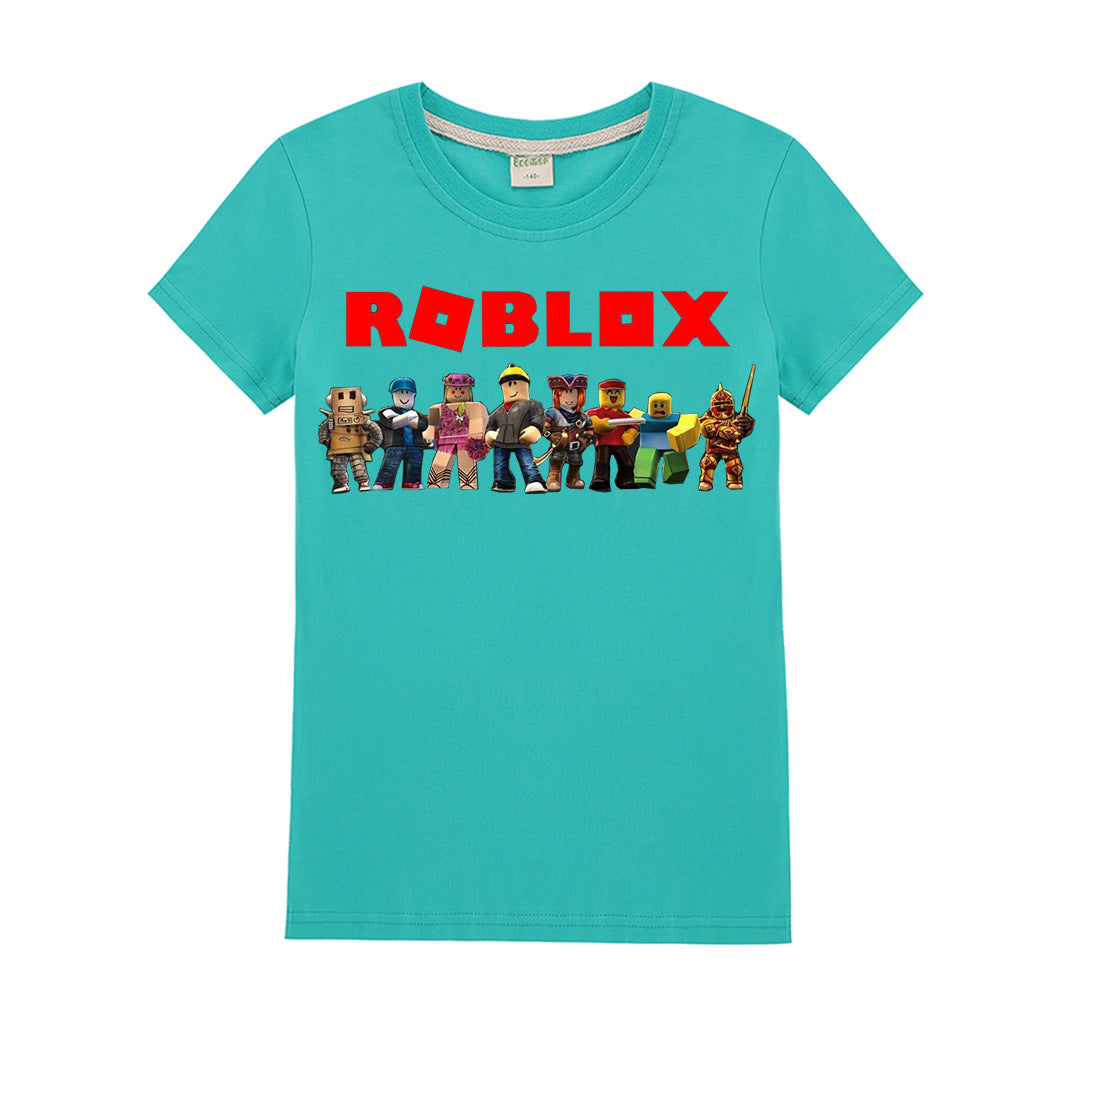 Roblox T Shirt For Boys And Girls Nfgoods - empty roblox bag t shirt